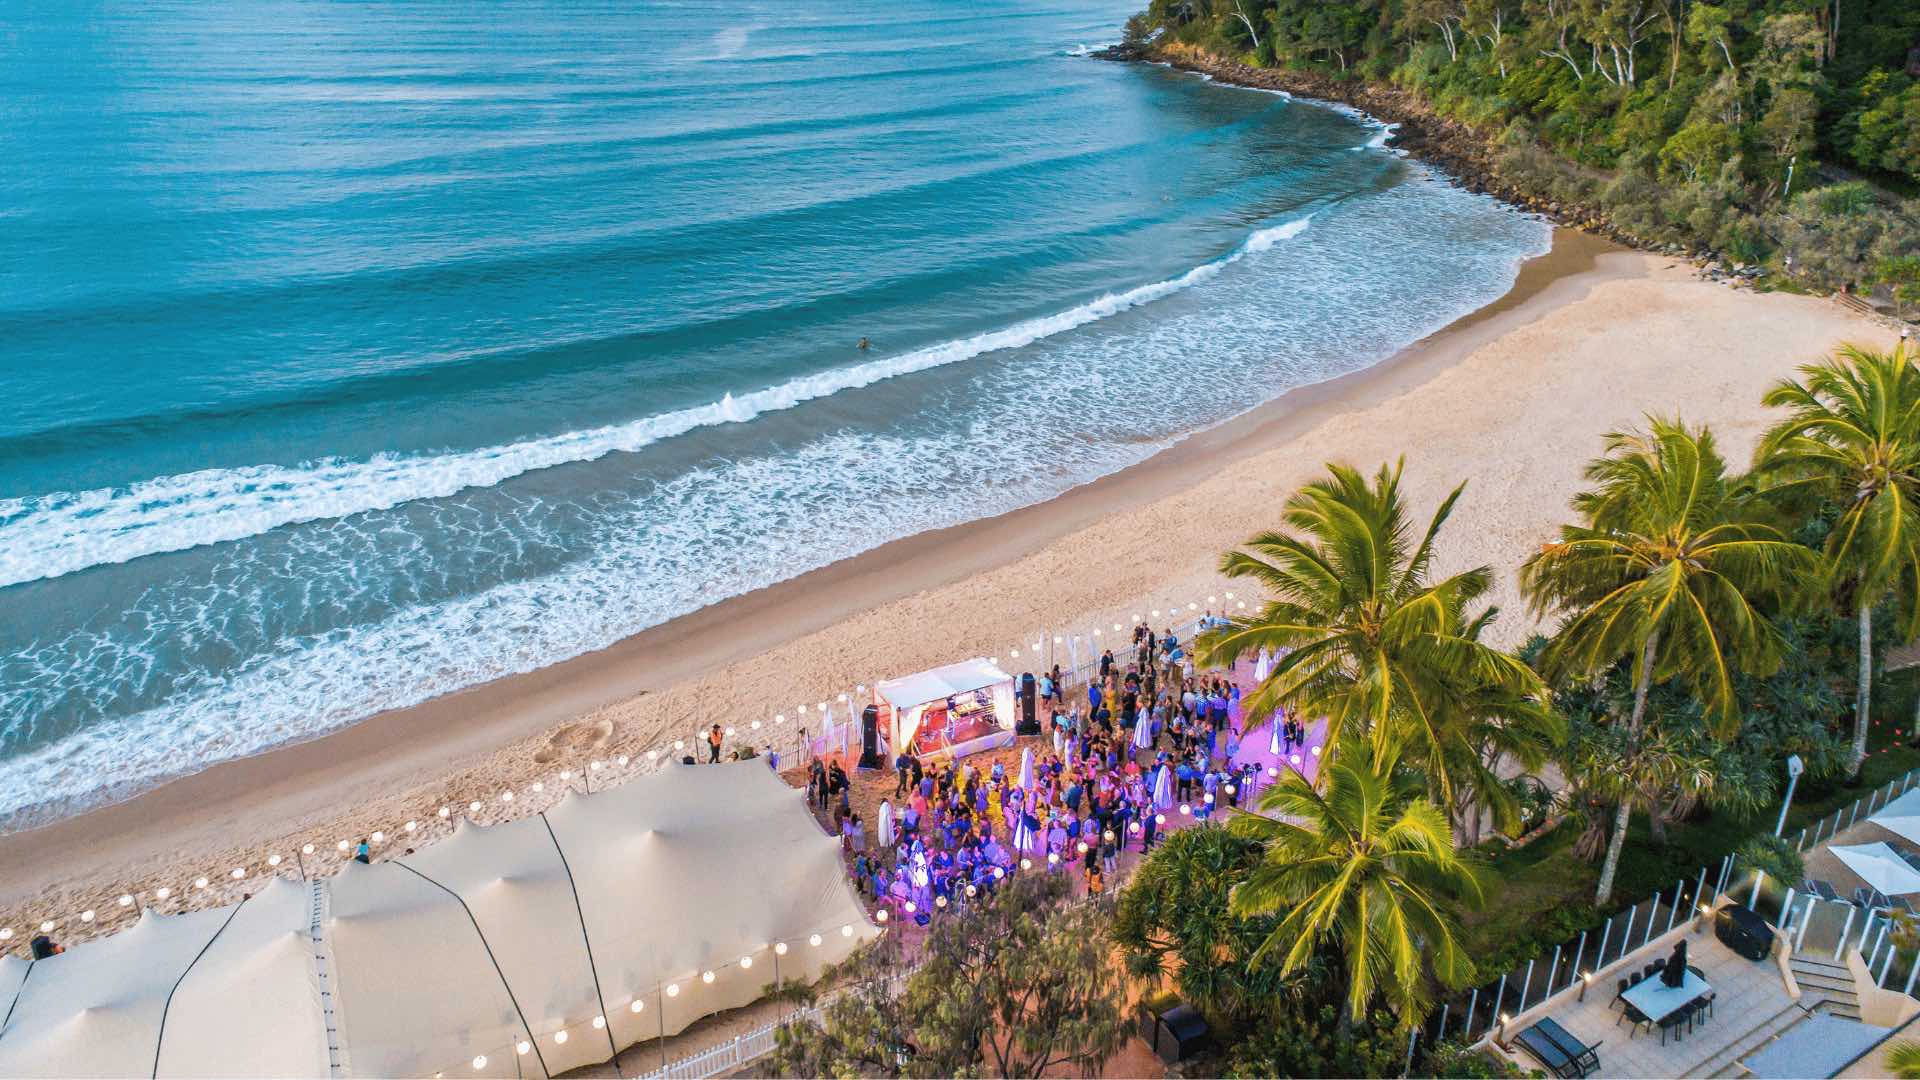 An overhead shot of the Noosa Eat and Drink Festival on the beach.